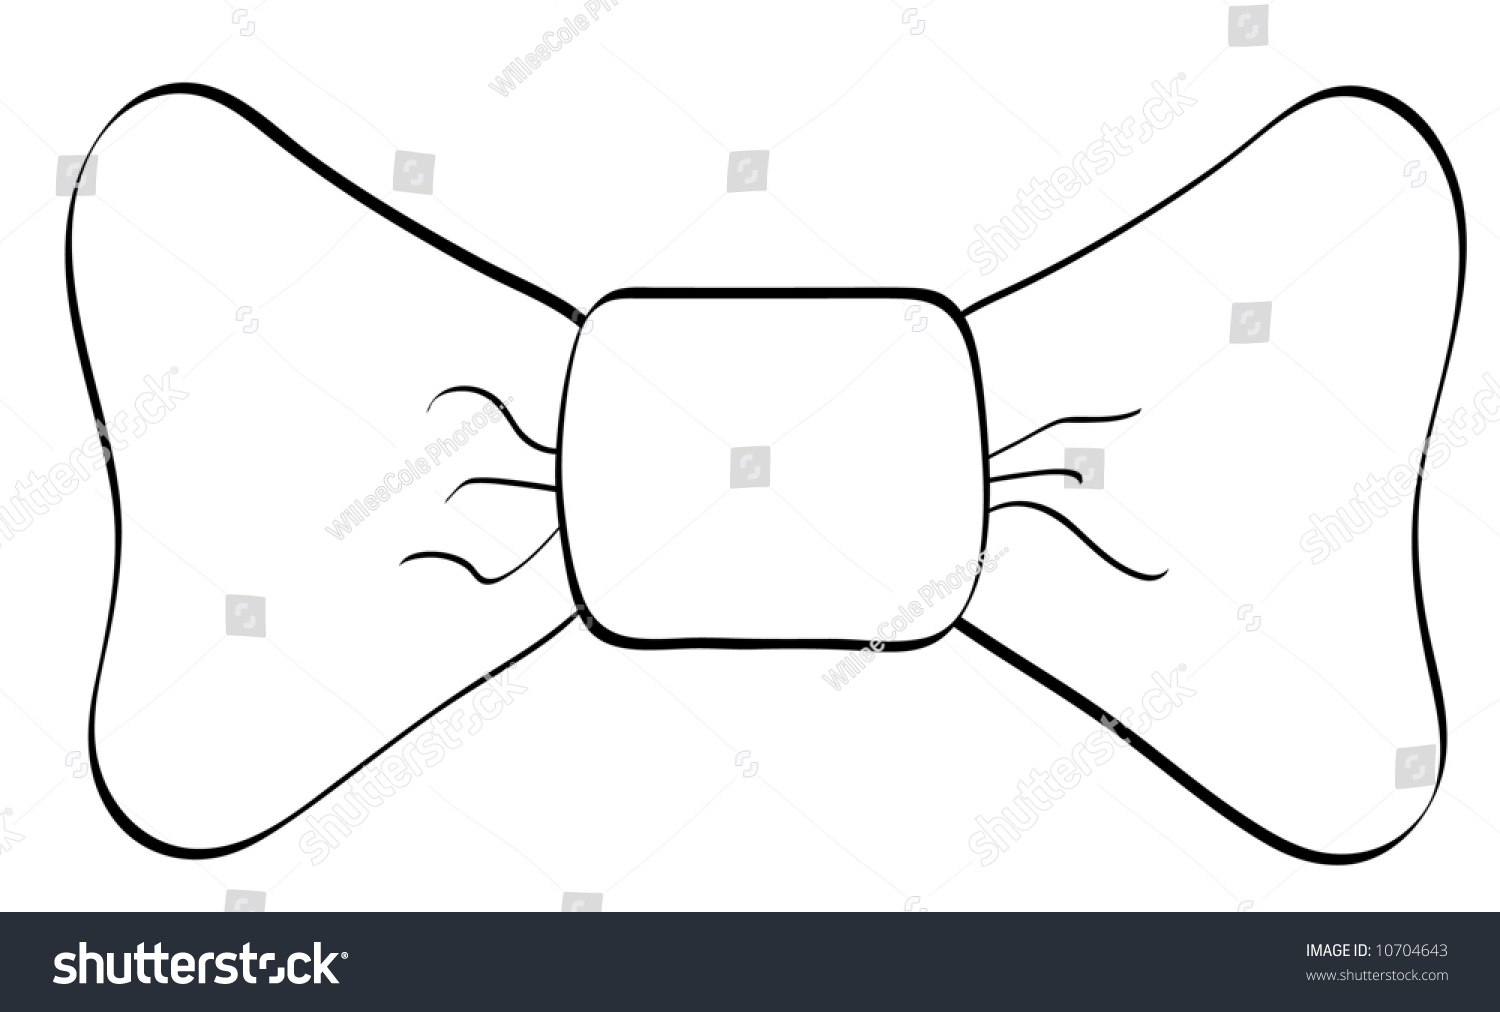 Bowtie Outline Isolated On White Background Stock Vector 10704643 ...